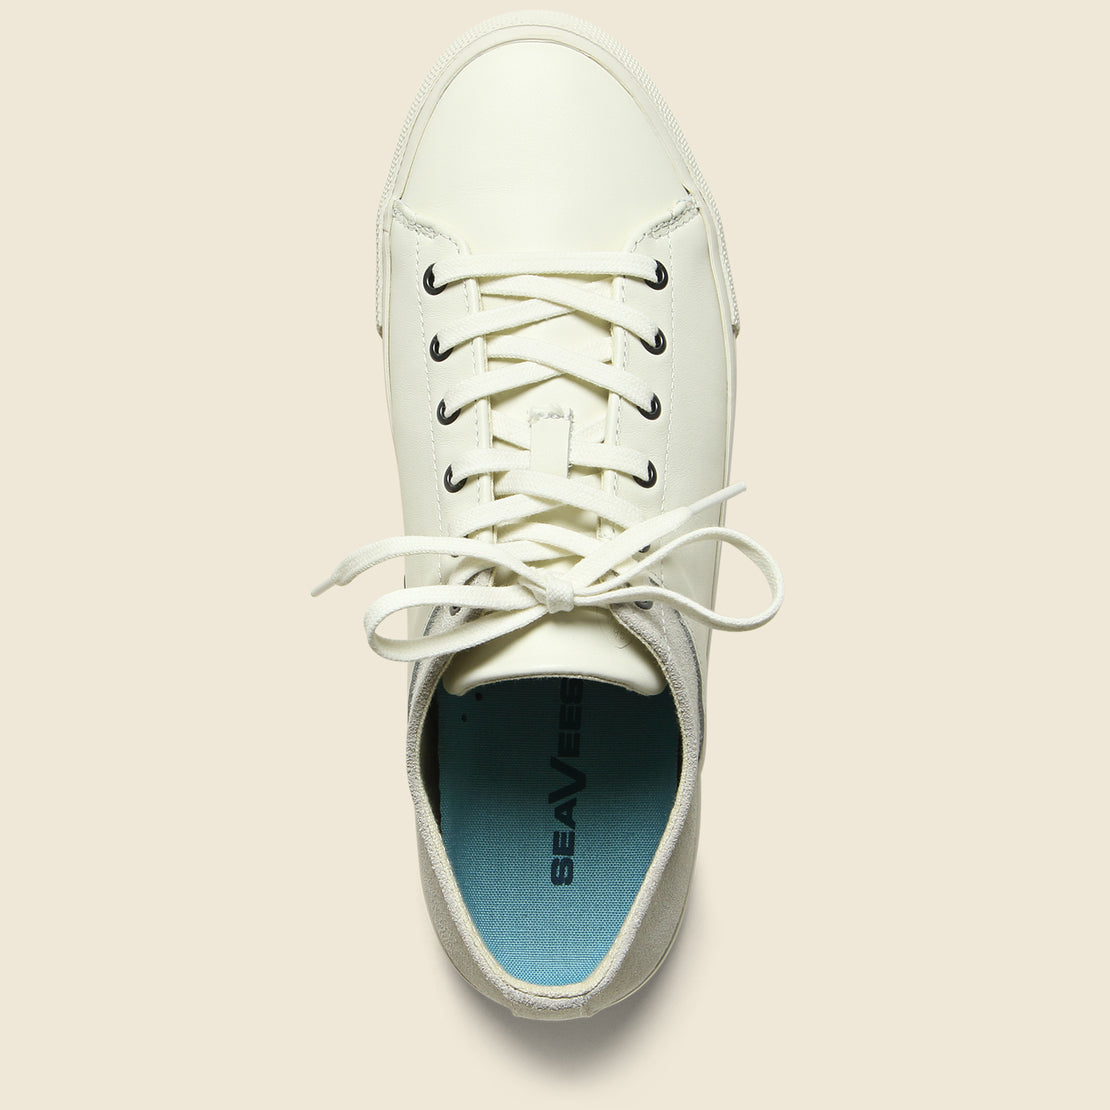 Monterey Sneaker - White - Seavees - STAG Provisions - Shoes - Athletic